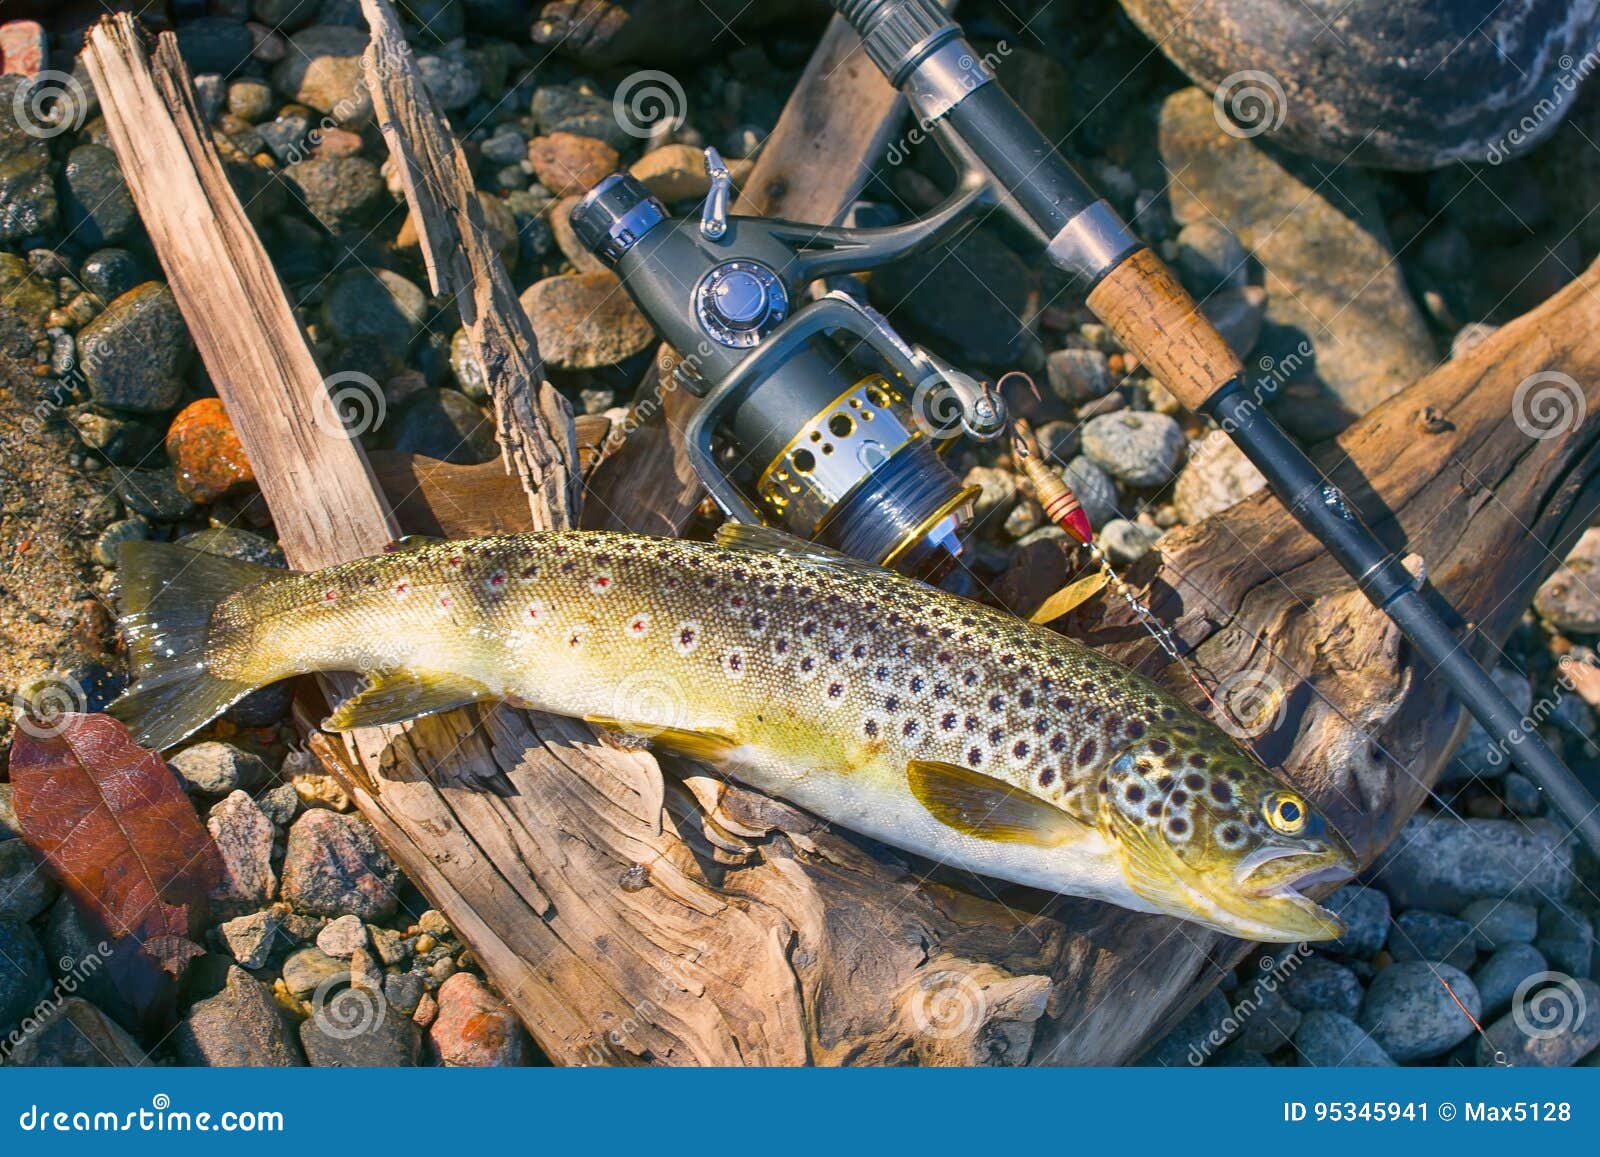 Caught by Spinning Brown Trout (Salmo Trutta Fario) Stock Image